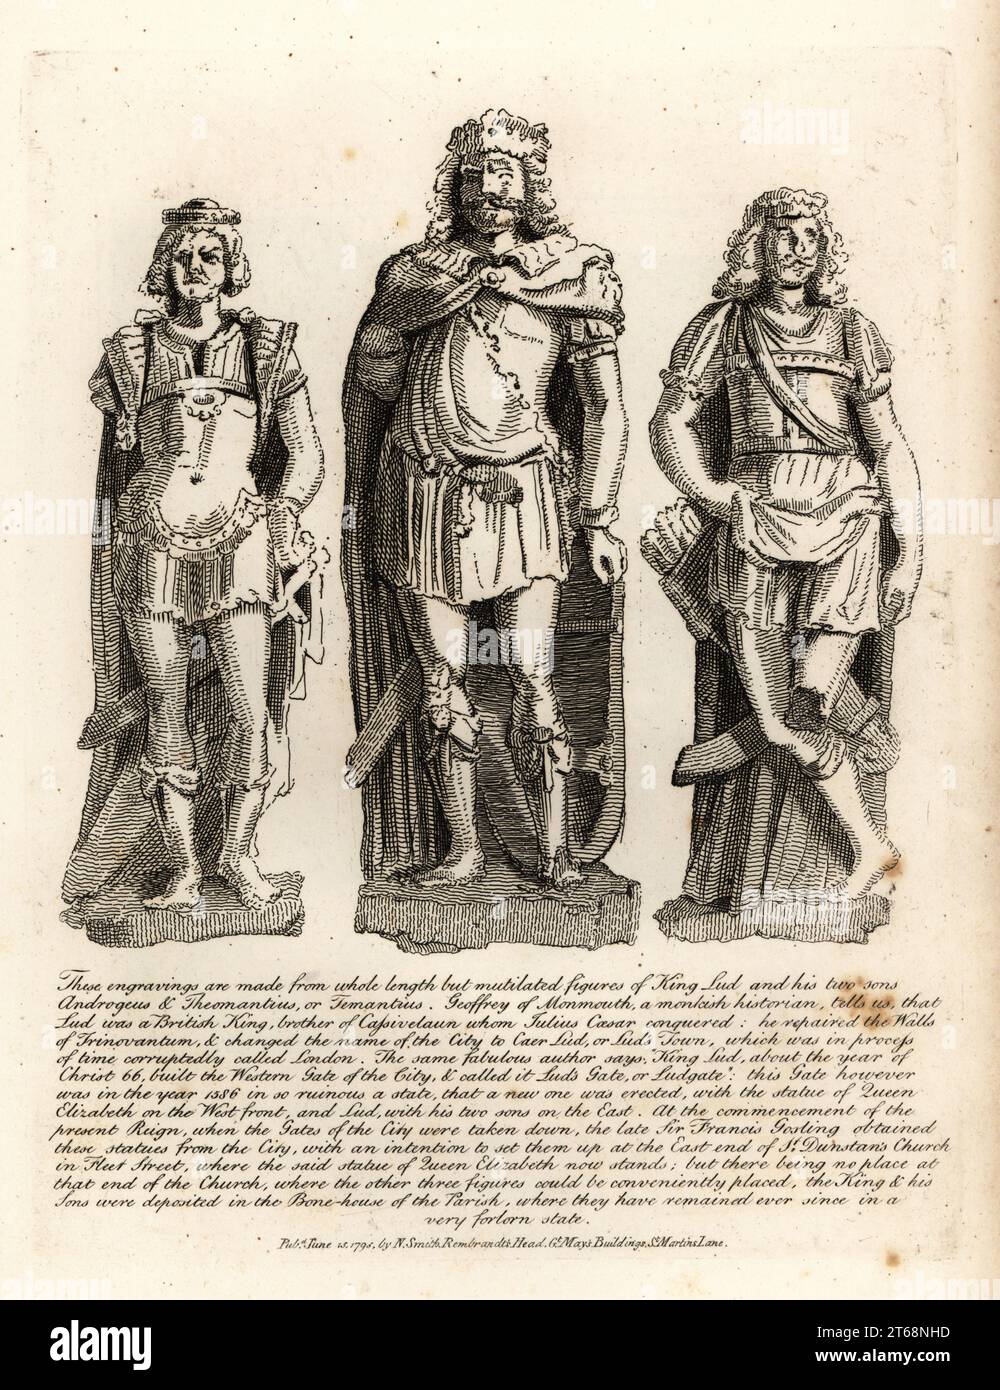 British King Lud and his sons Angrogeus and Theomantius (Temantius), repairer of the walls of Trinovantum, later Caer Lud or Luds Town, 66AD. Copperplate engraving by John Thomas Smith after original drawings by members of the Society of Antiquaries from his J.T. Smiths Antiquities of London and its Environs, J. Sewell, R. Folder, J. Simco, London, 1795. Stock Photo